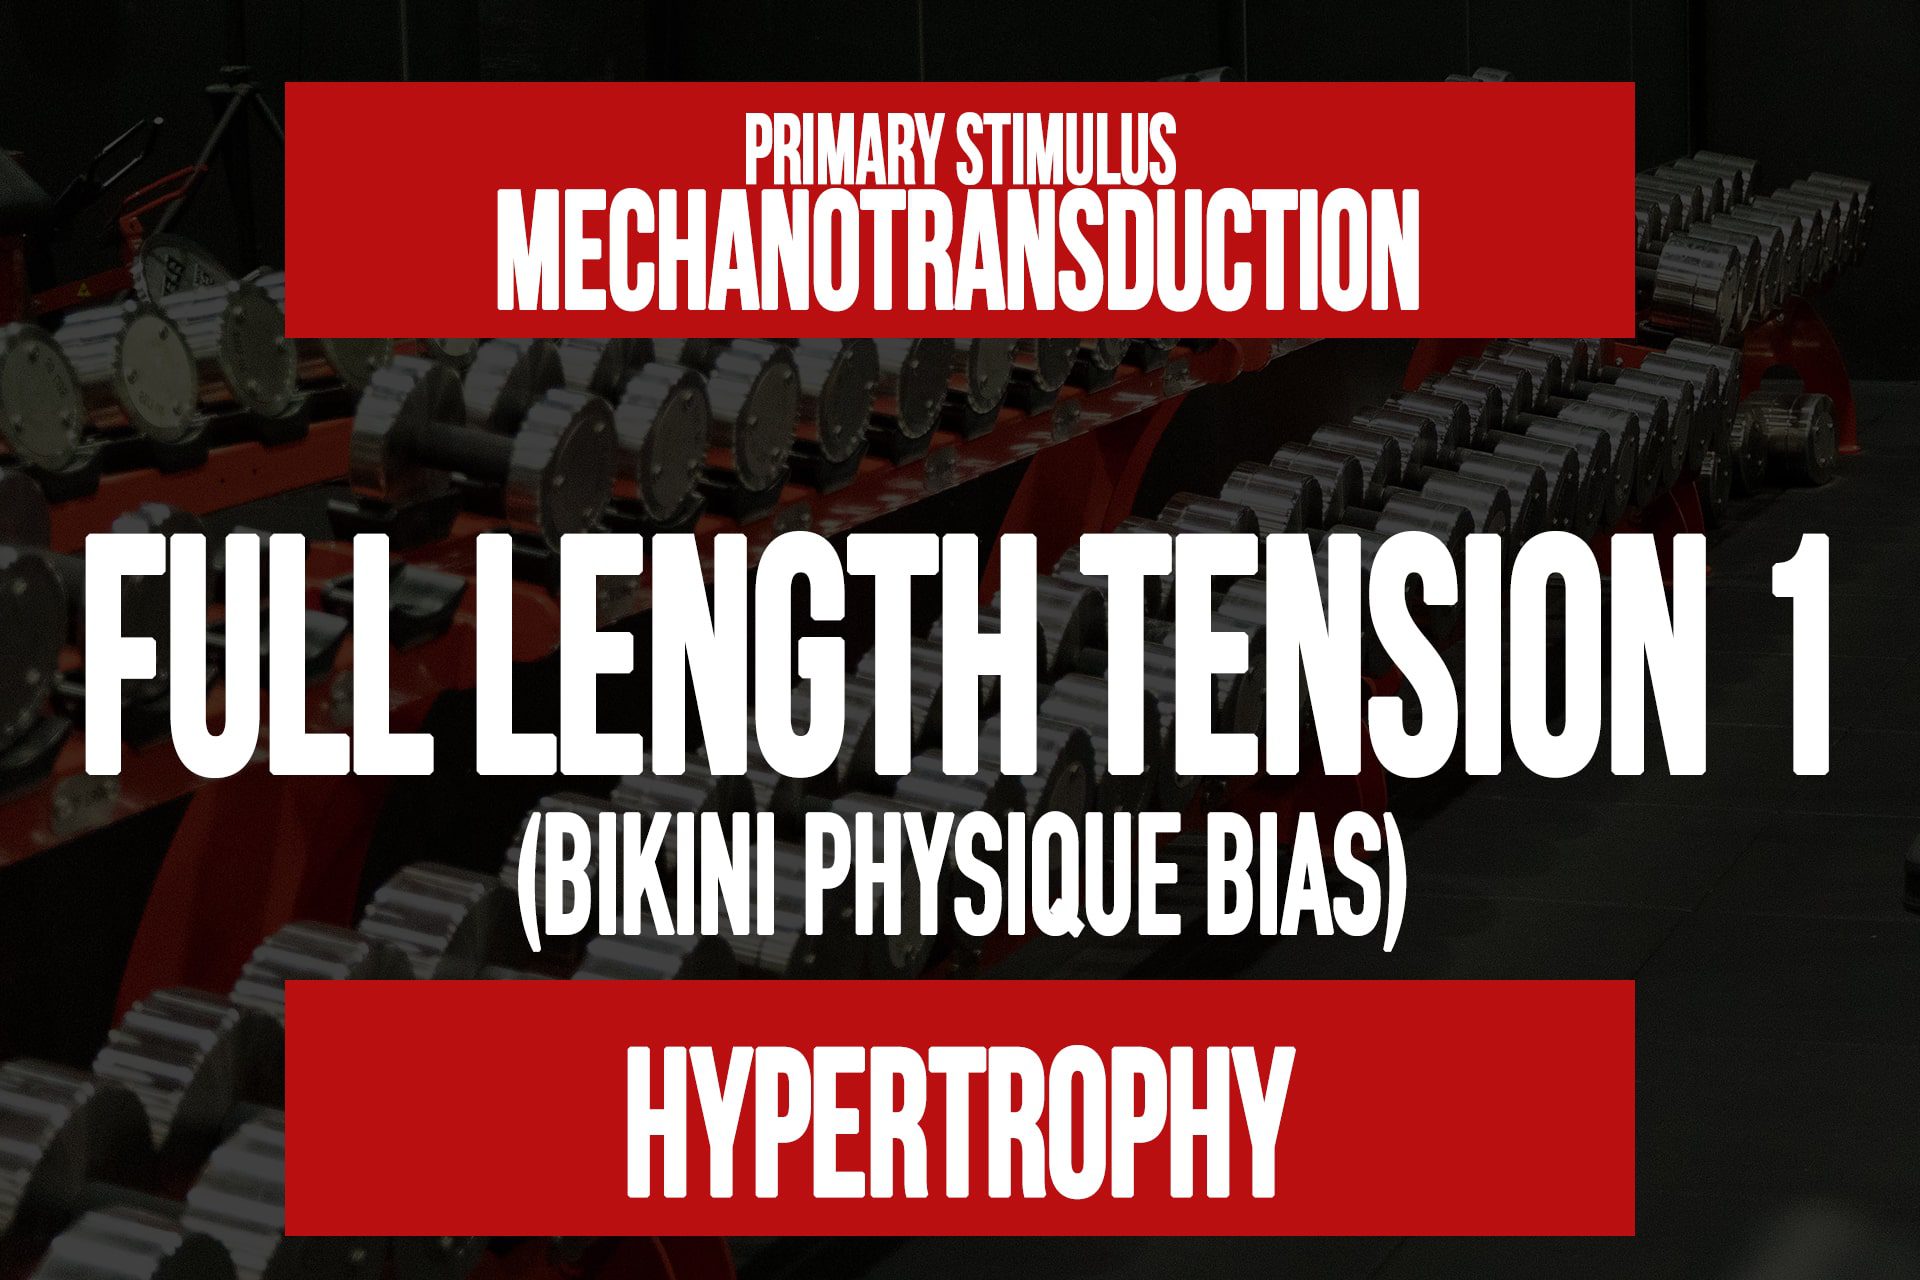 Full Length Tension 1 (Female Physique)